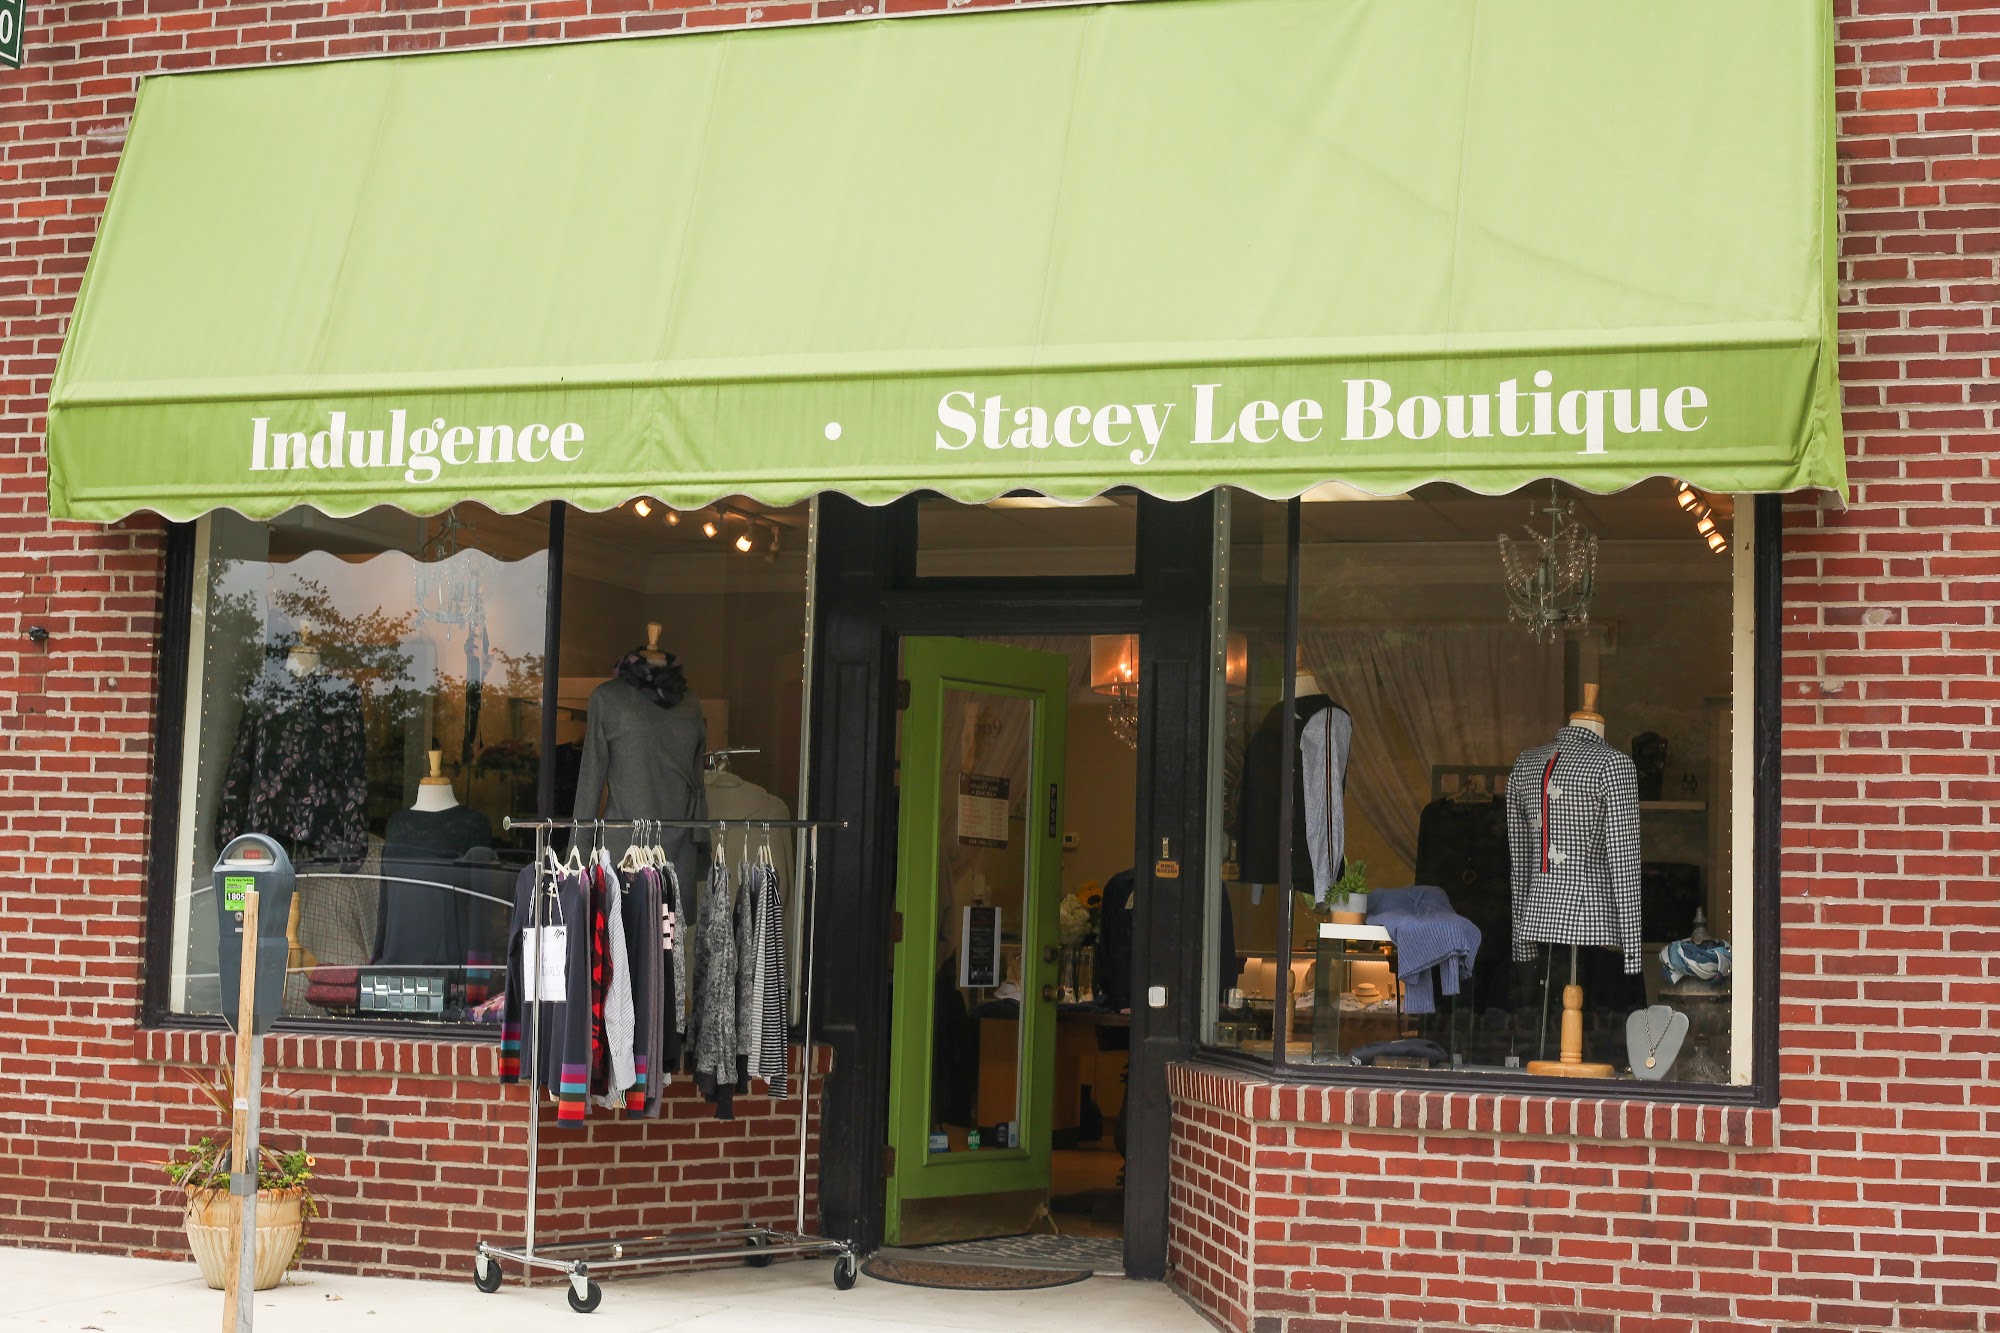 Stacey Lee Boutique